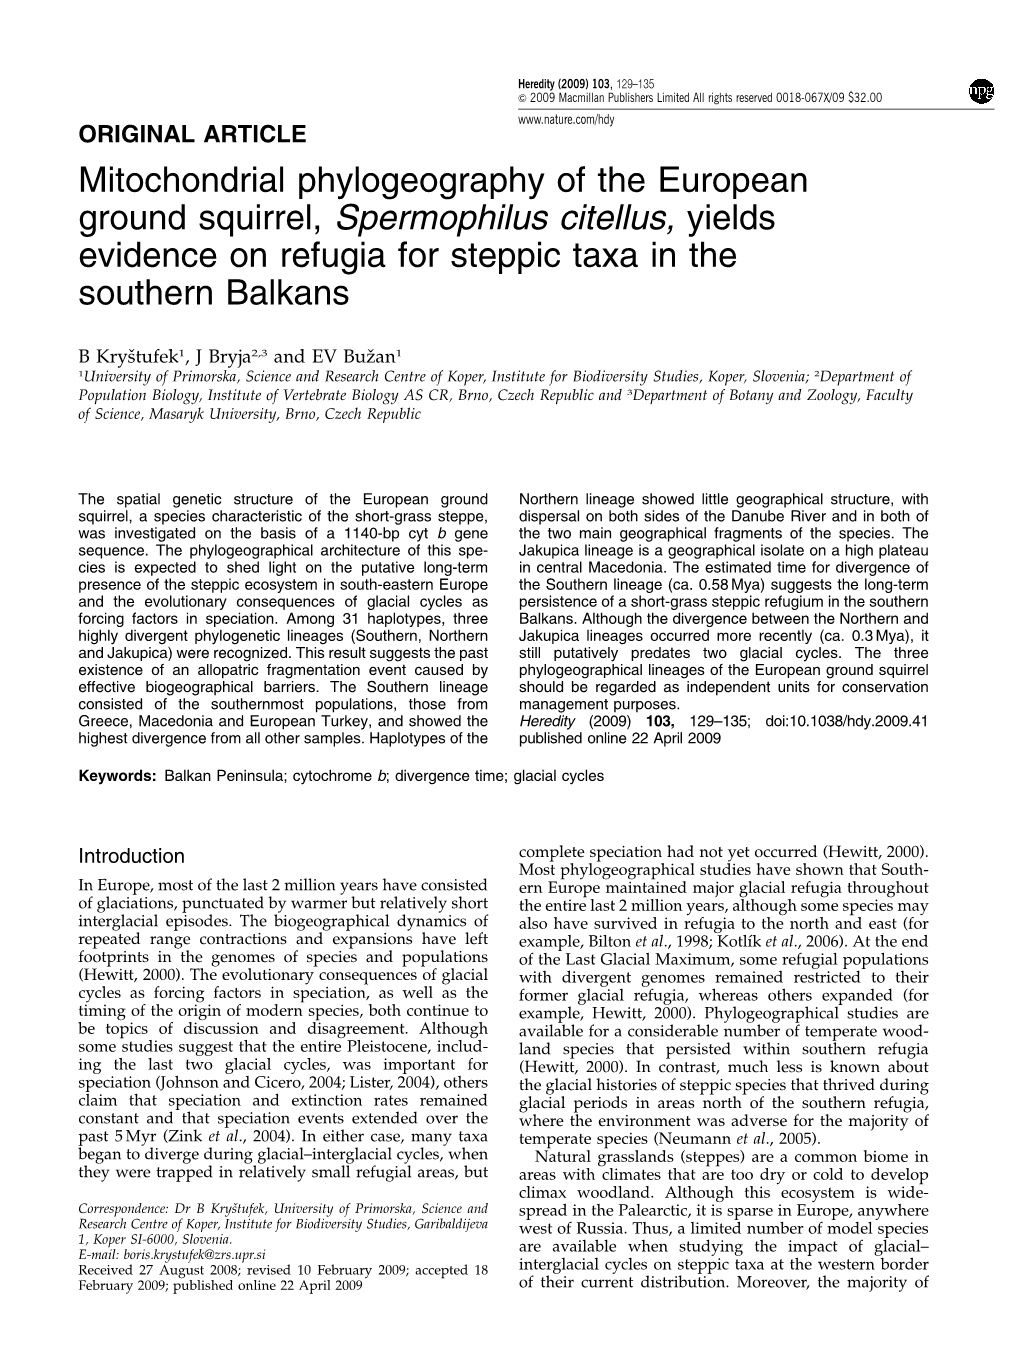 Mitochondrial Phylogeography of the European Ground Squirrel, Spermophilus Citellus, Yields Evidence on Refugia for Steppic Taxa in the Southern Balkans